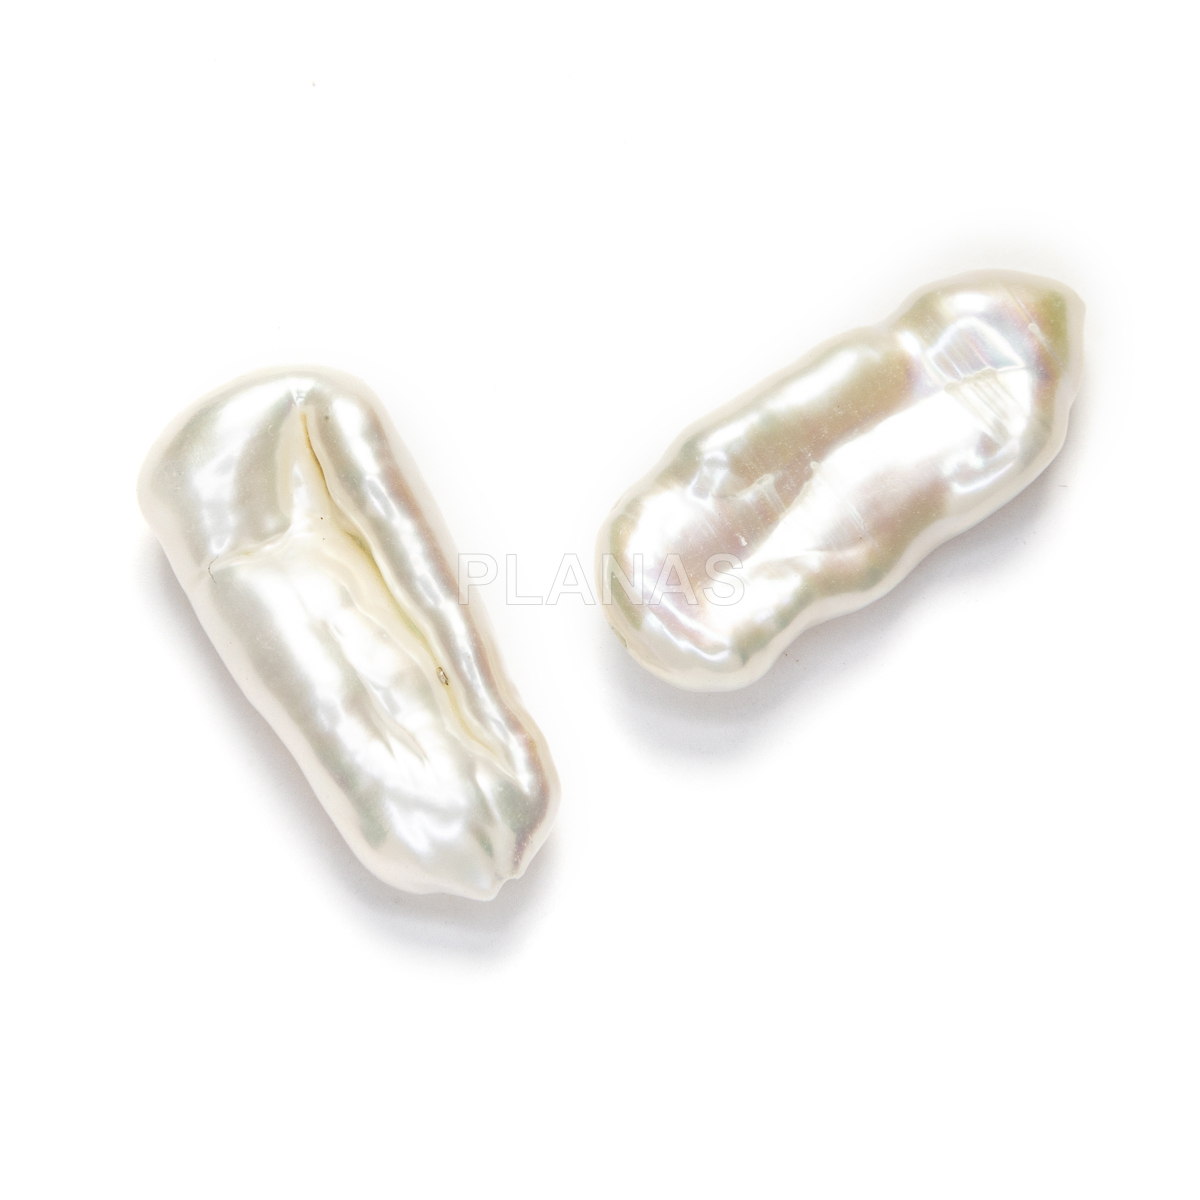 Freshwater cultured pearl. 22x10mm.